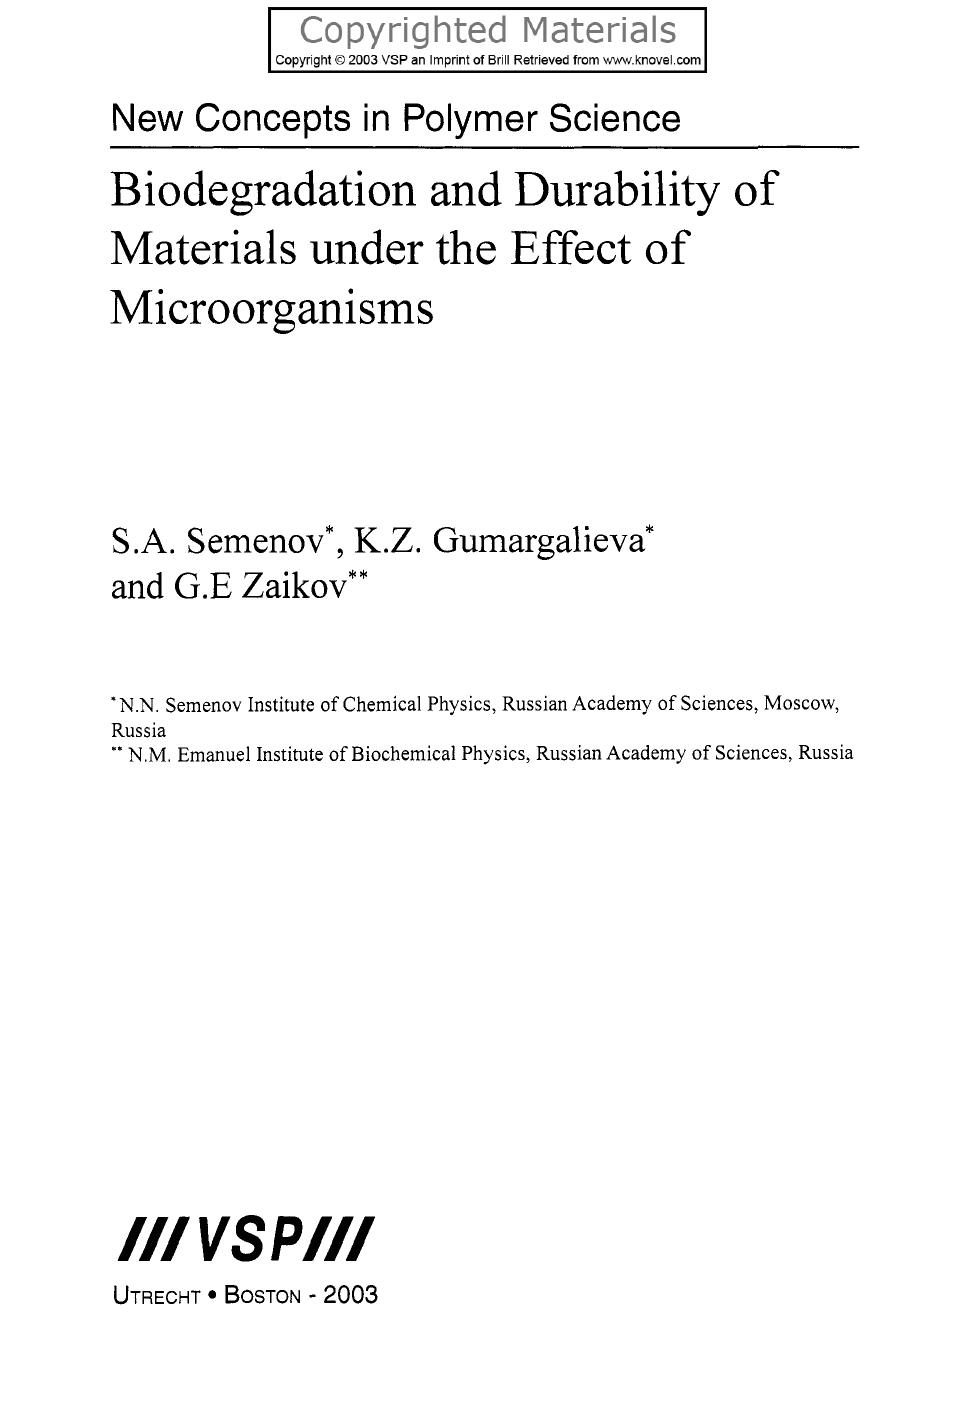 Biodegradation and Durability of Materials under the Effect of Microorganisms 2003